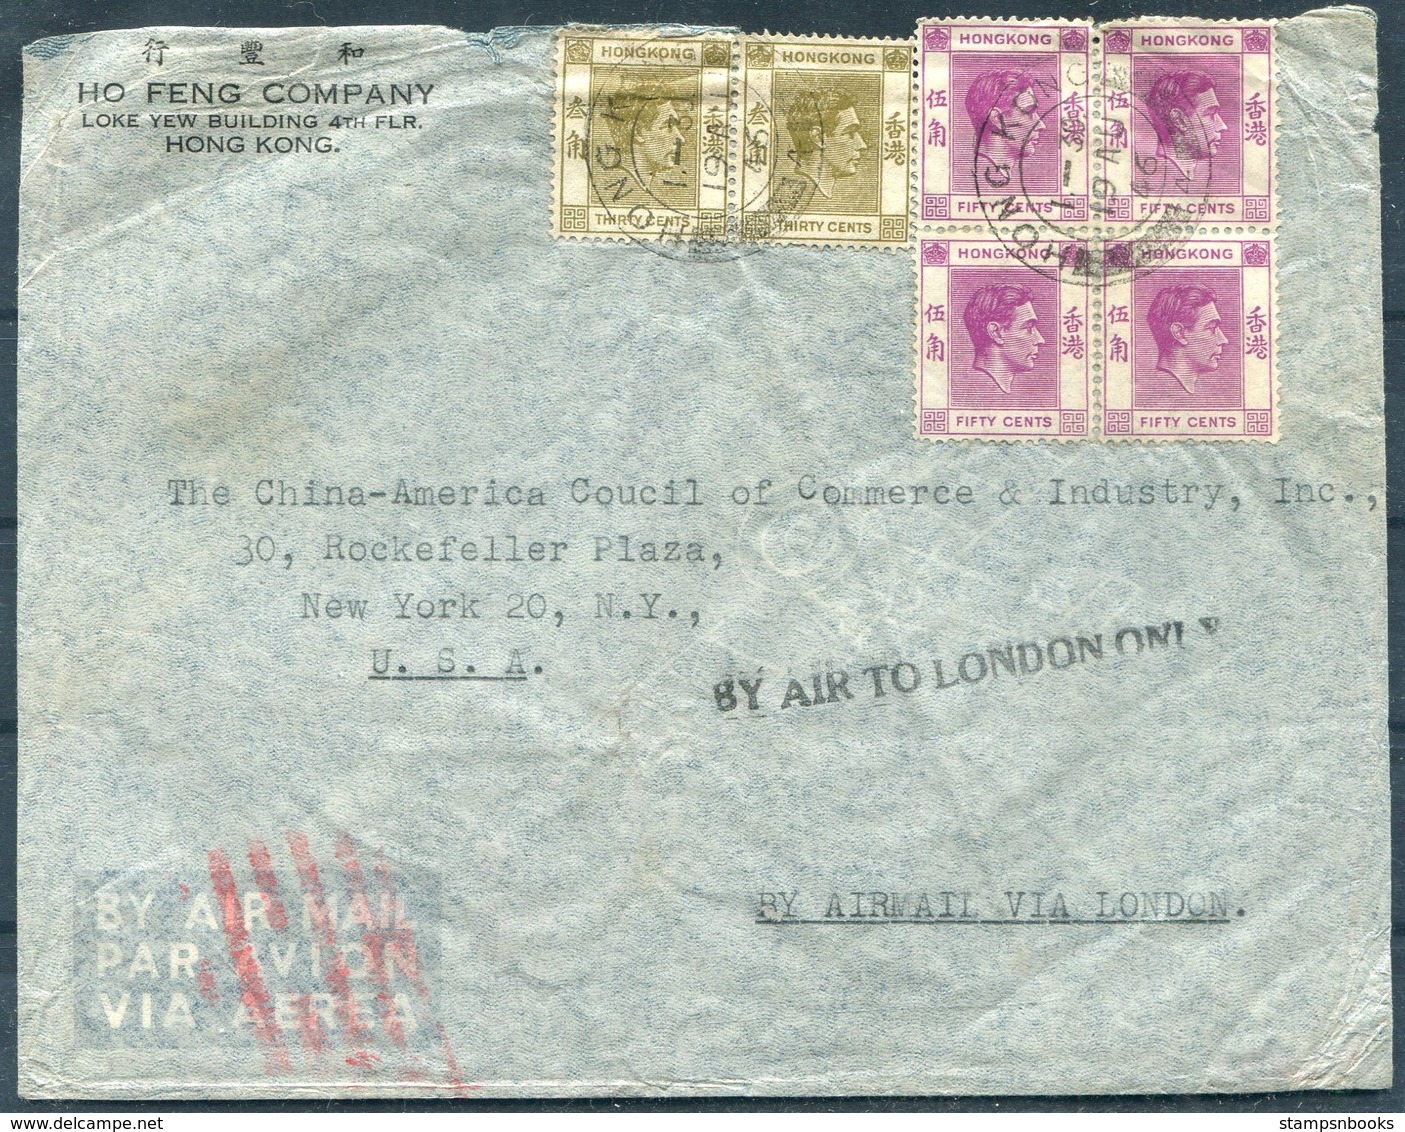 1946 Hong Kong $2.60 Rate Airmail Cover - The China America Council Of Commerce, New York USA. "BY AIR TO LONDON ONLY" - Briefe U. Dokumente